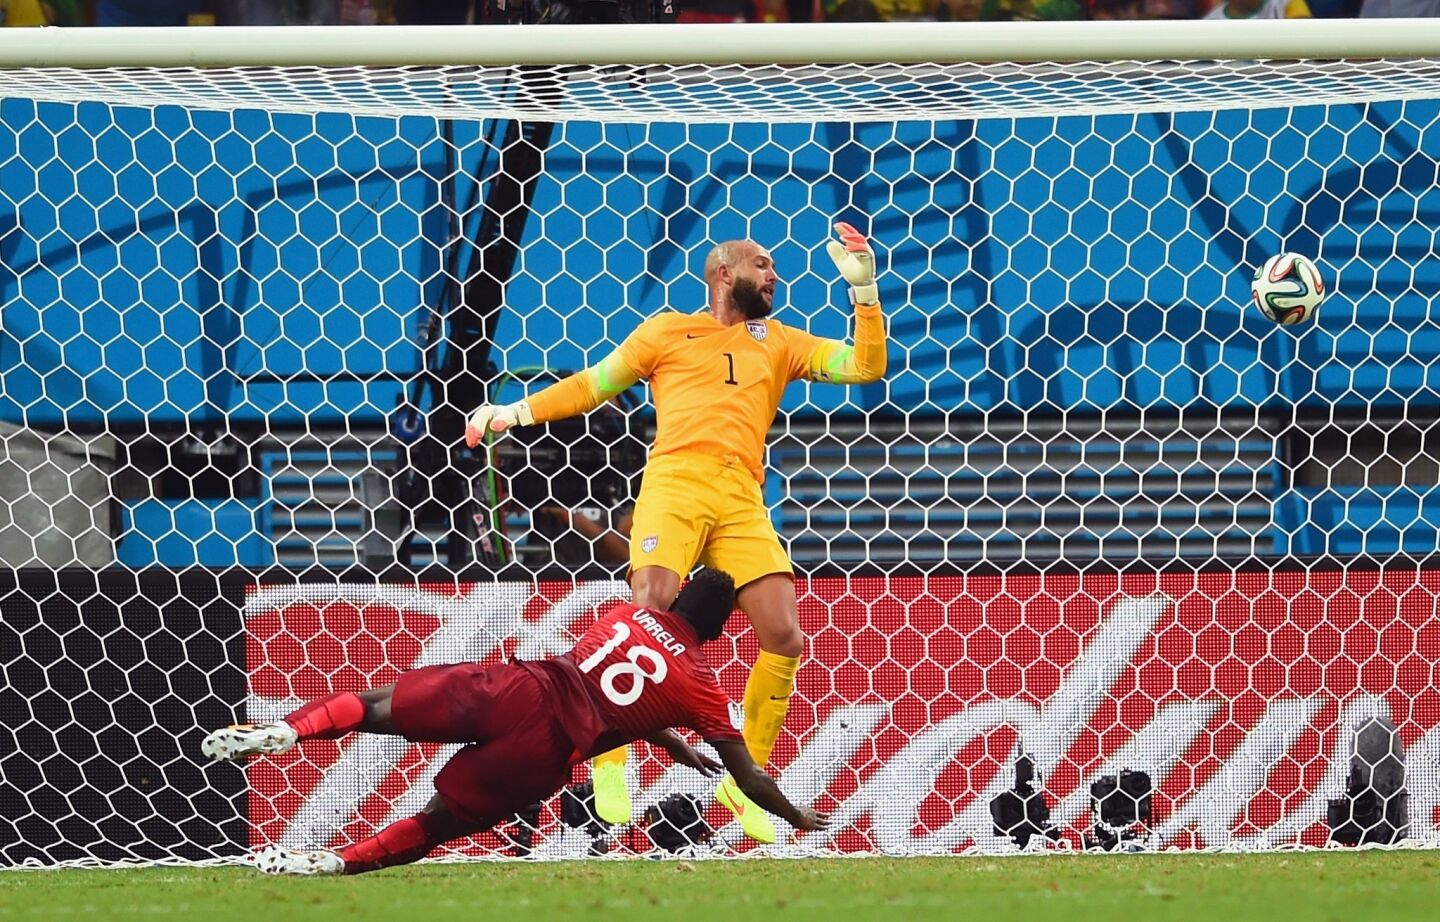 Portugal midfielder Silvestre Varela sends a diving header past U.S. goalkeeper Tim Howard in the final seconds of their World Cup Group G game on Sunday at Arena Amozonia in Manaus, Brazil.